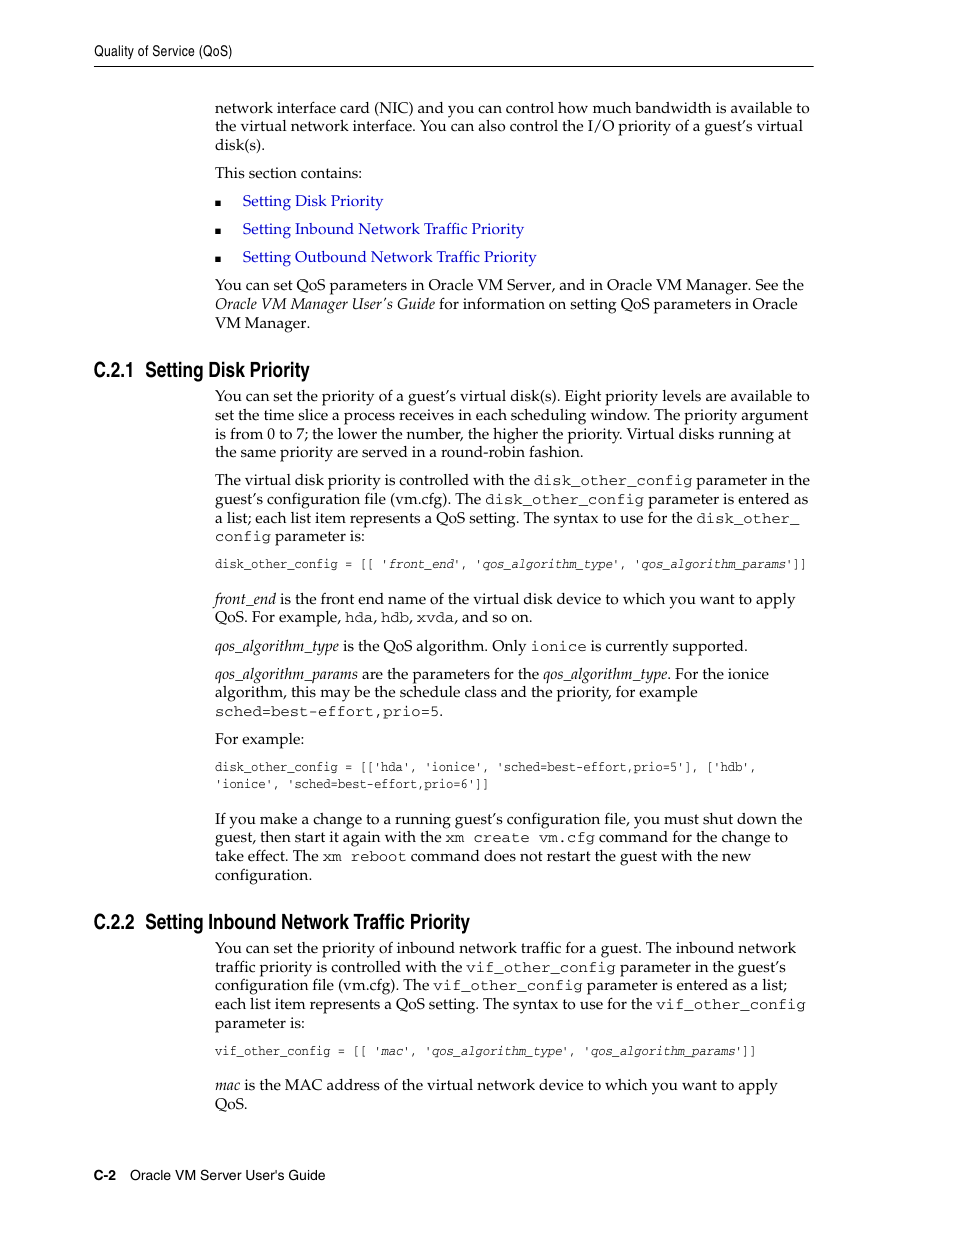 C.2.1 setting disk priority, C.2.2 setting inbound network traffic priority, C.2.1 | Setting dis, C.2.2, Setting inbound network | Oracle Audio Technologies E10898-02 User Manual | Page 90 / 112